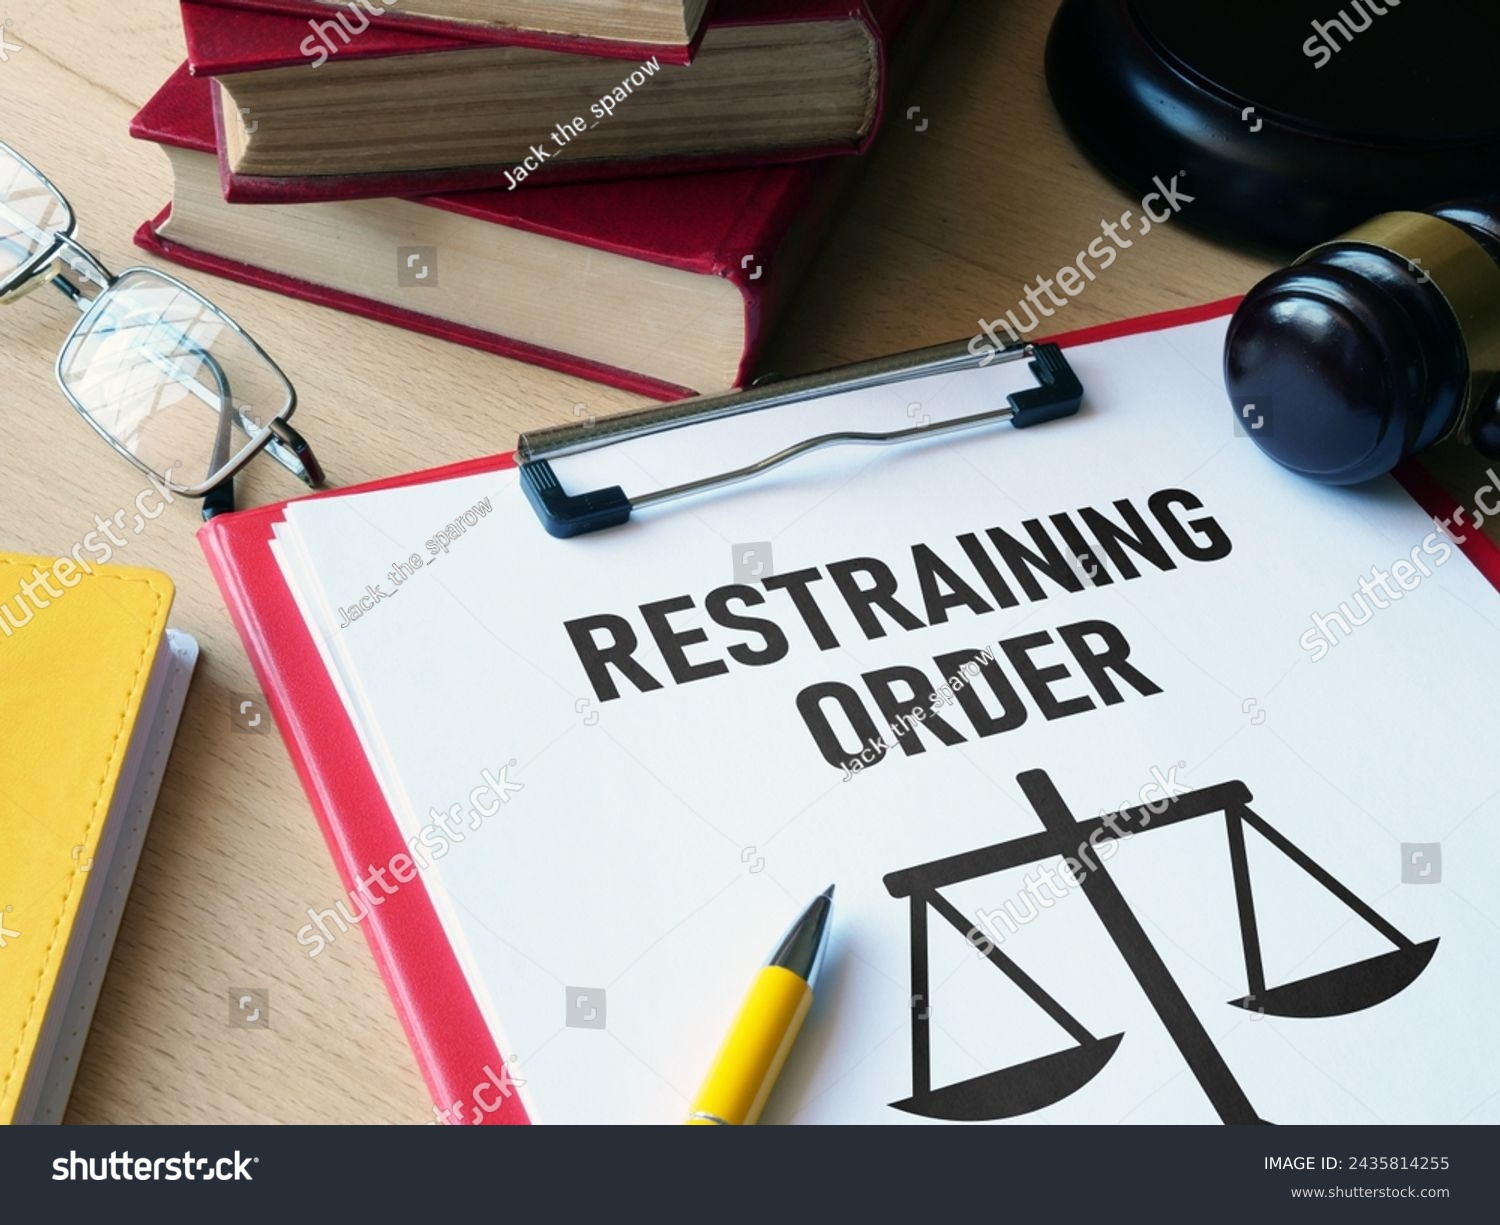 Restraining order is shown using a text #2435814255